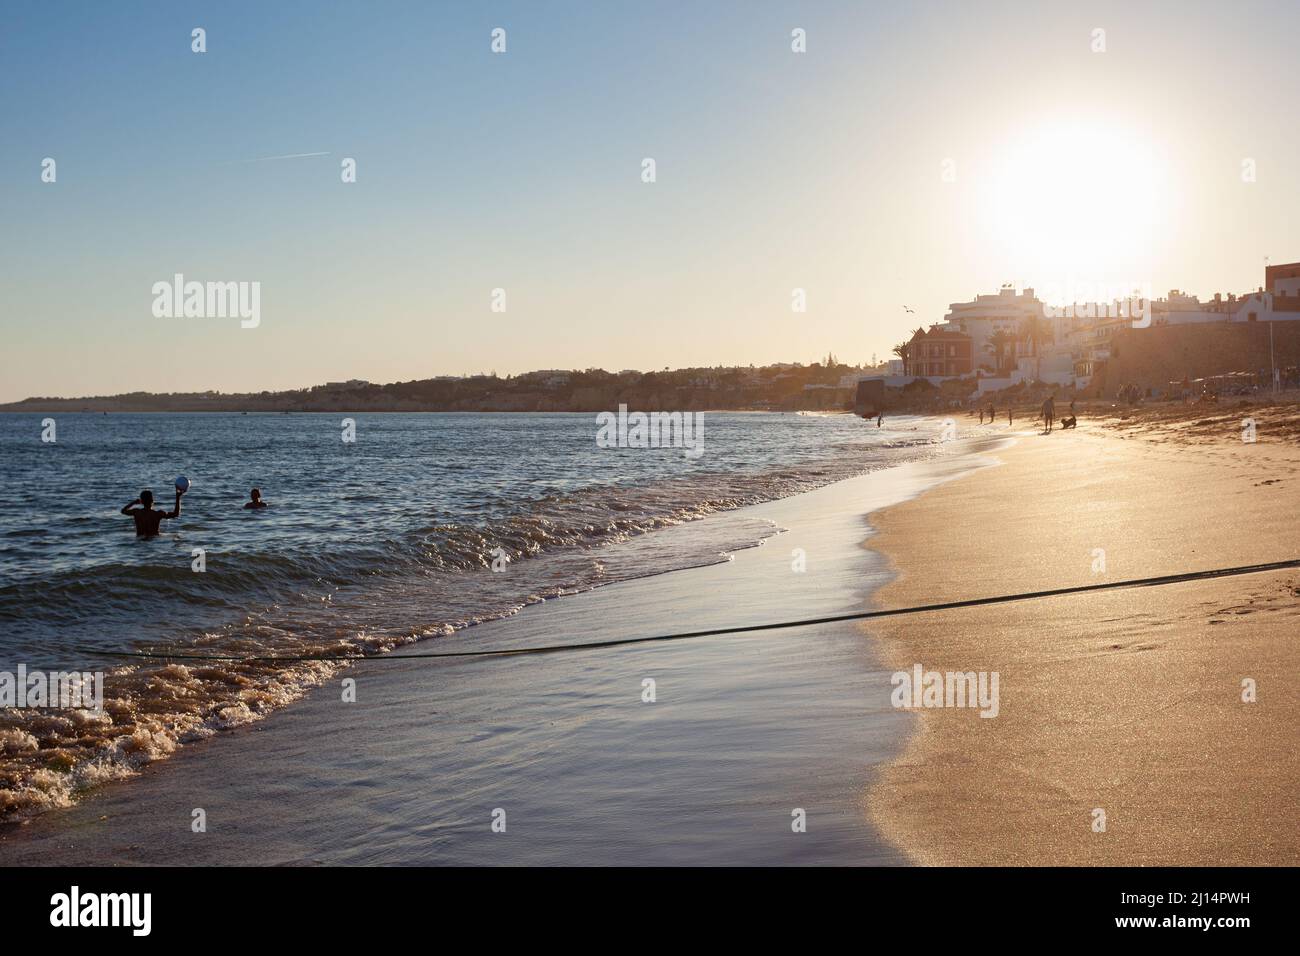 Sunset over the beach of the Portuguese seaside town of Armação de Pêra in the southern region of the Algarve, Portugal. Stock Photo